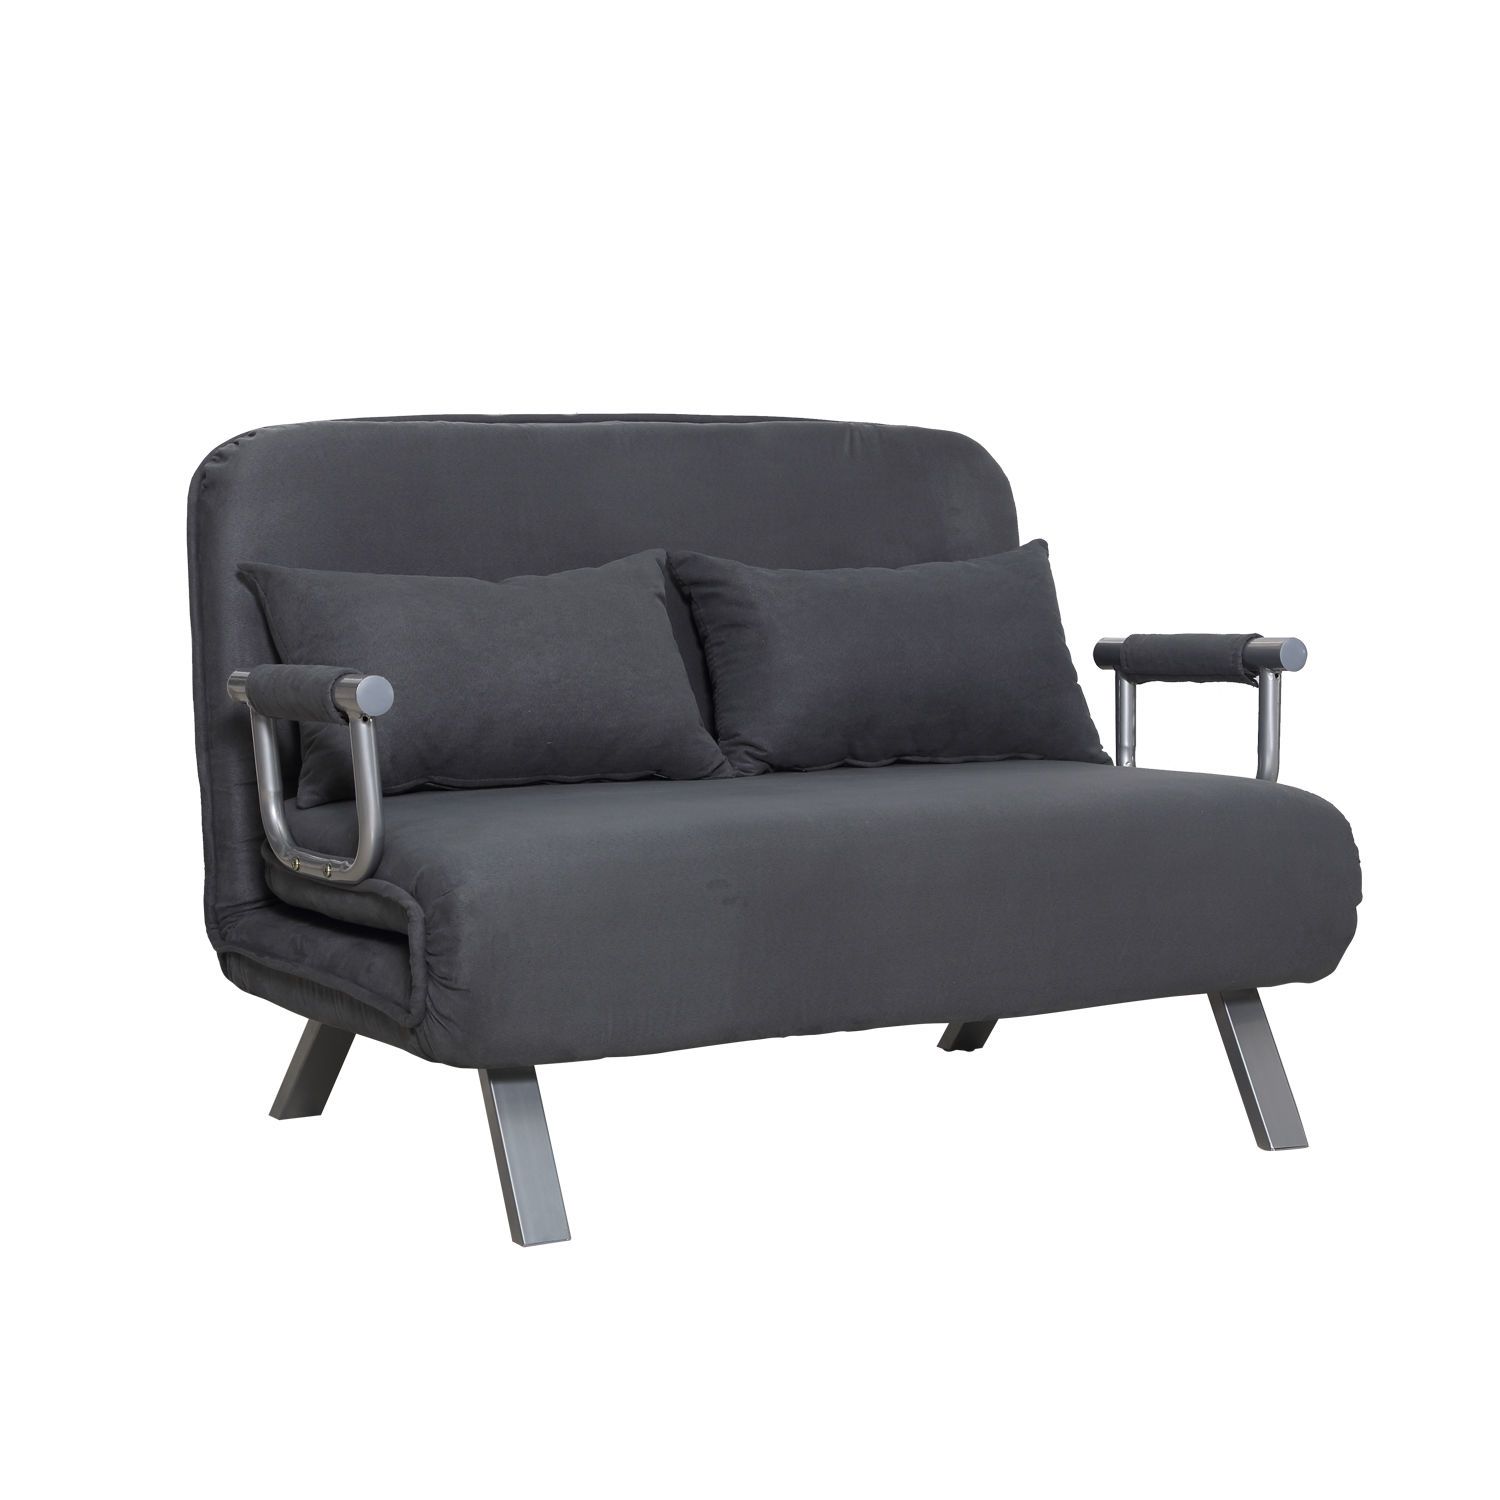 Homcom Twin Size Folding 5 Position Steel Convertible Throughout Fold Up Sofa Chairs (View 15 of 15)